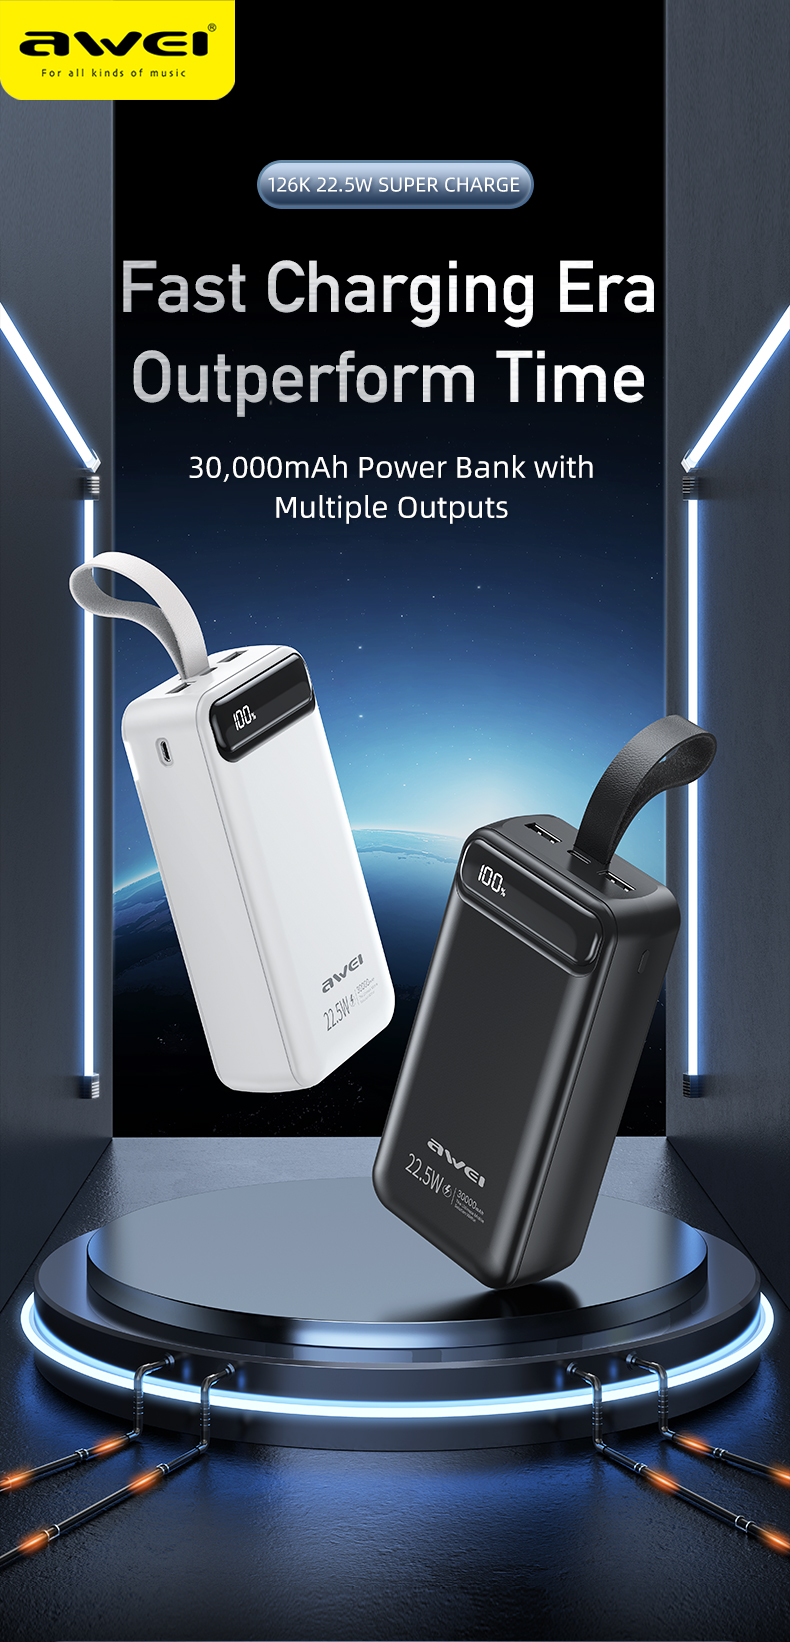 Awei P126K 22.5W 30000mAh Power Bank Digital Display Fast Charging External Battery Fast Charge Emergency Power Bank With Flashlight for iPhone 14 Pro Max for Xiaomi for Samsung